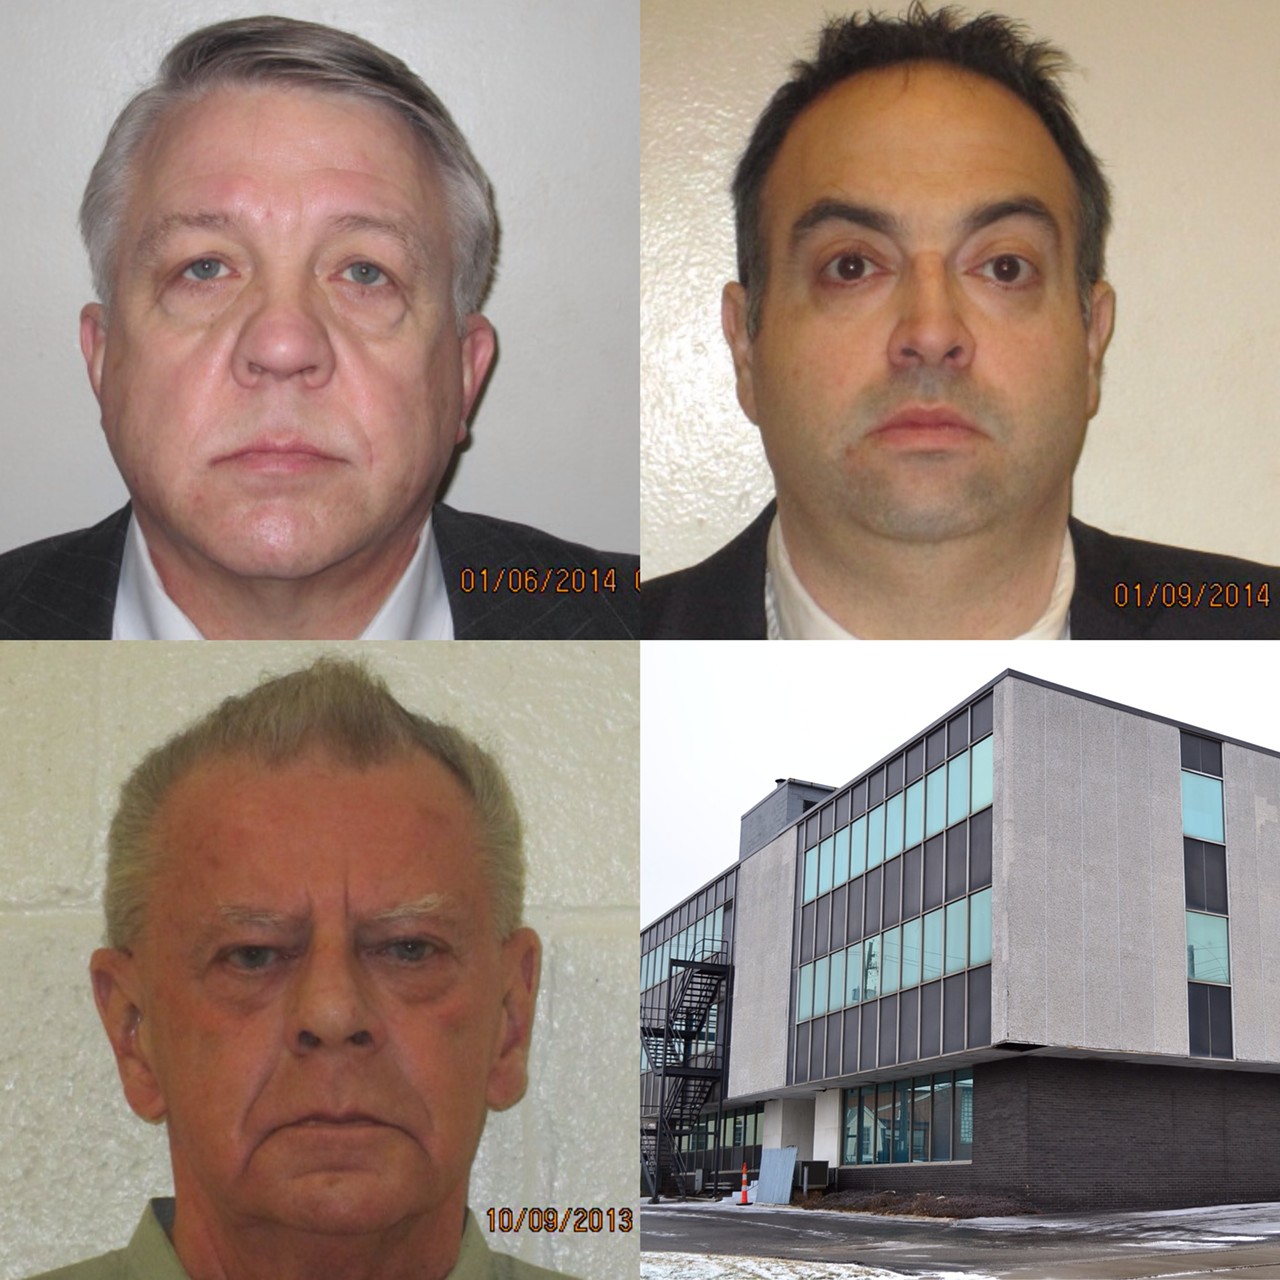 Top left: Bedford Municipal Court Judge Harry  J Jacob III. Top right: Bedford law director Ken Schuman. Bottom left: Jim Walsh, who ran the brothel from the third floor of his office building. Bottom right: 466 Northfield Rd in Bedford, where "Studio 54" was based.